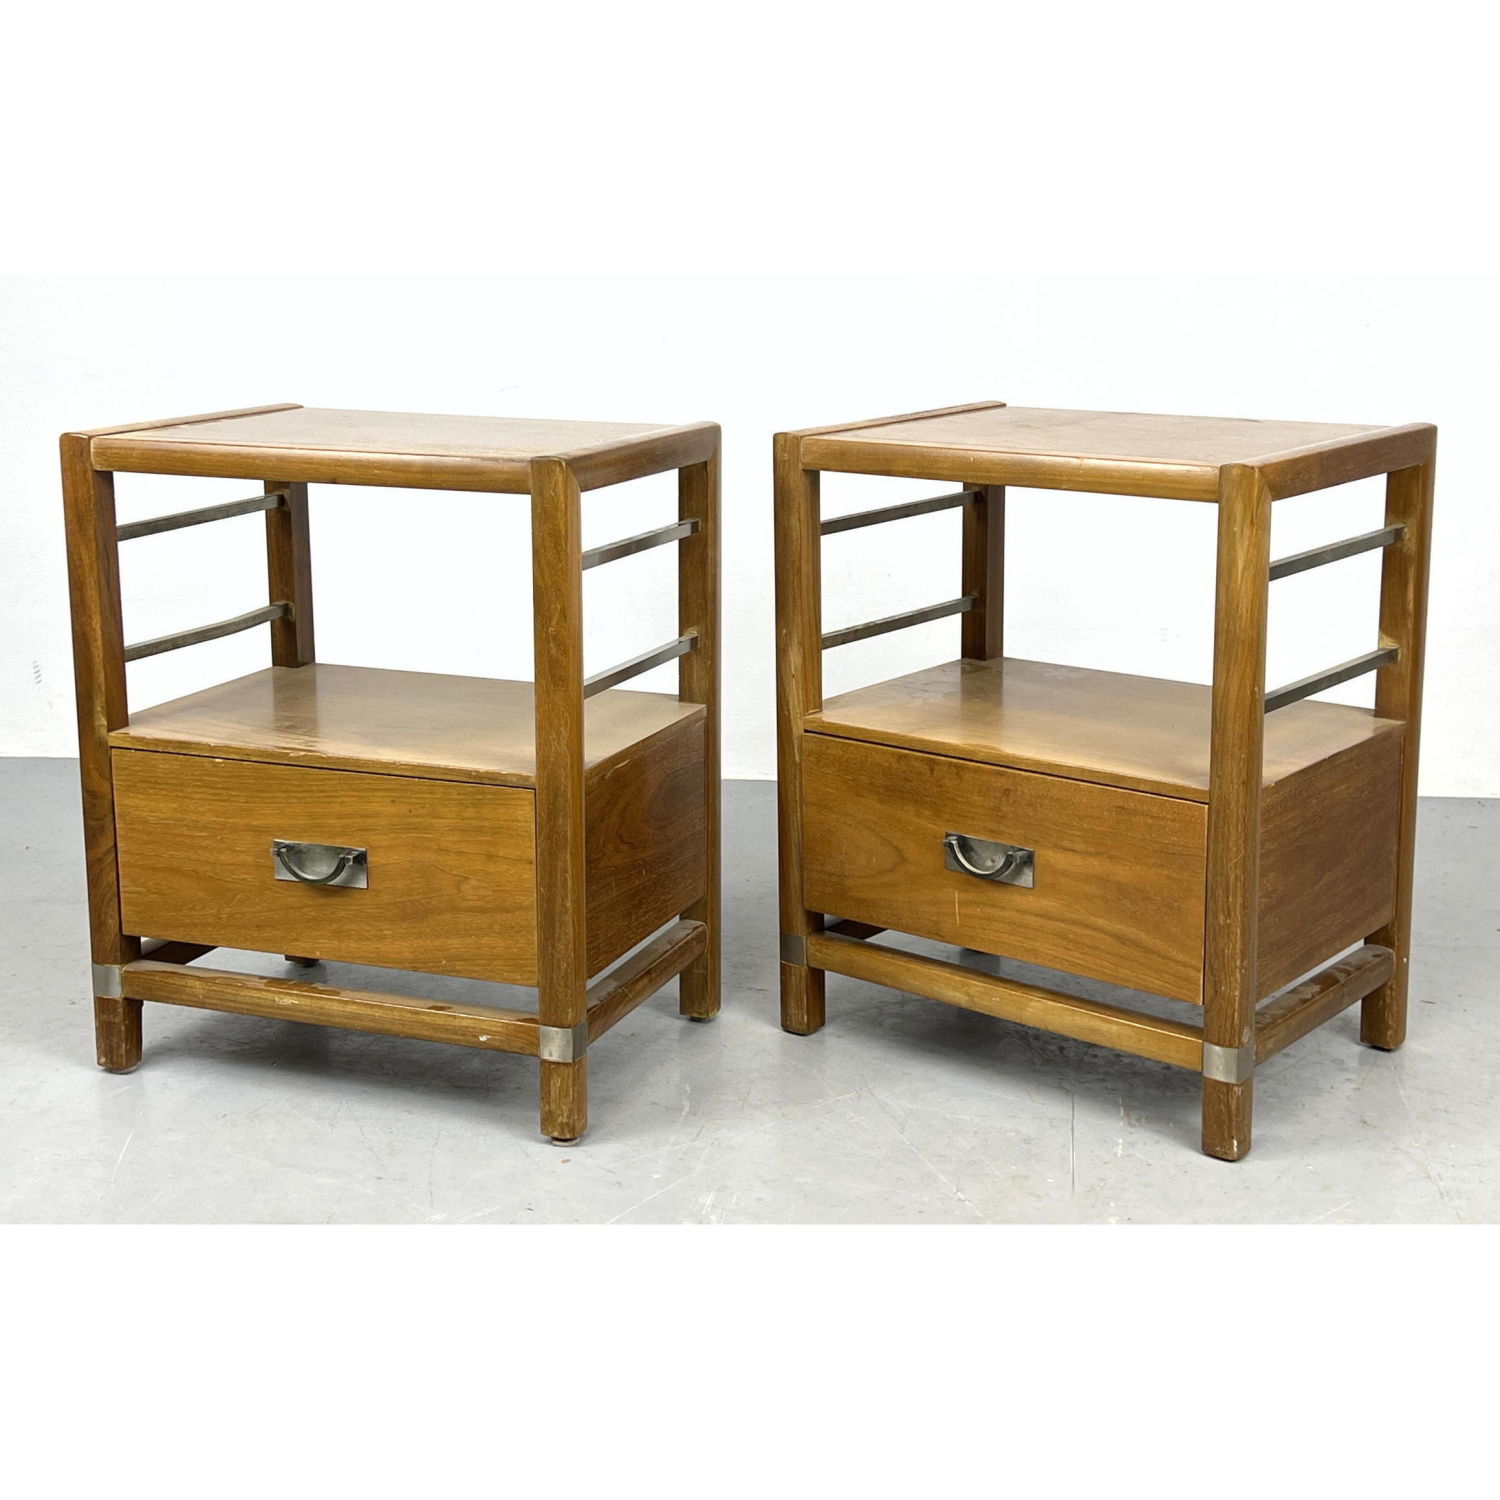 Pr HICKORY Night Stands. Each has